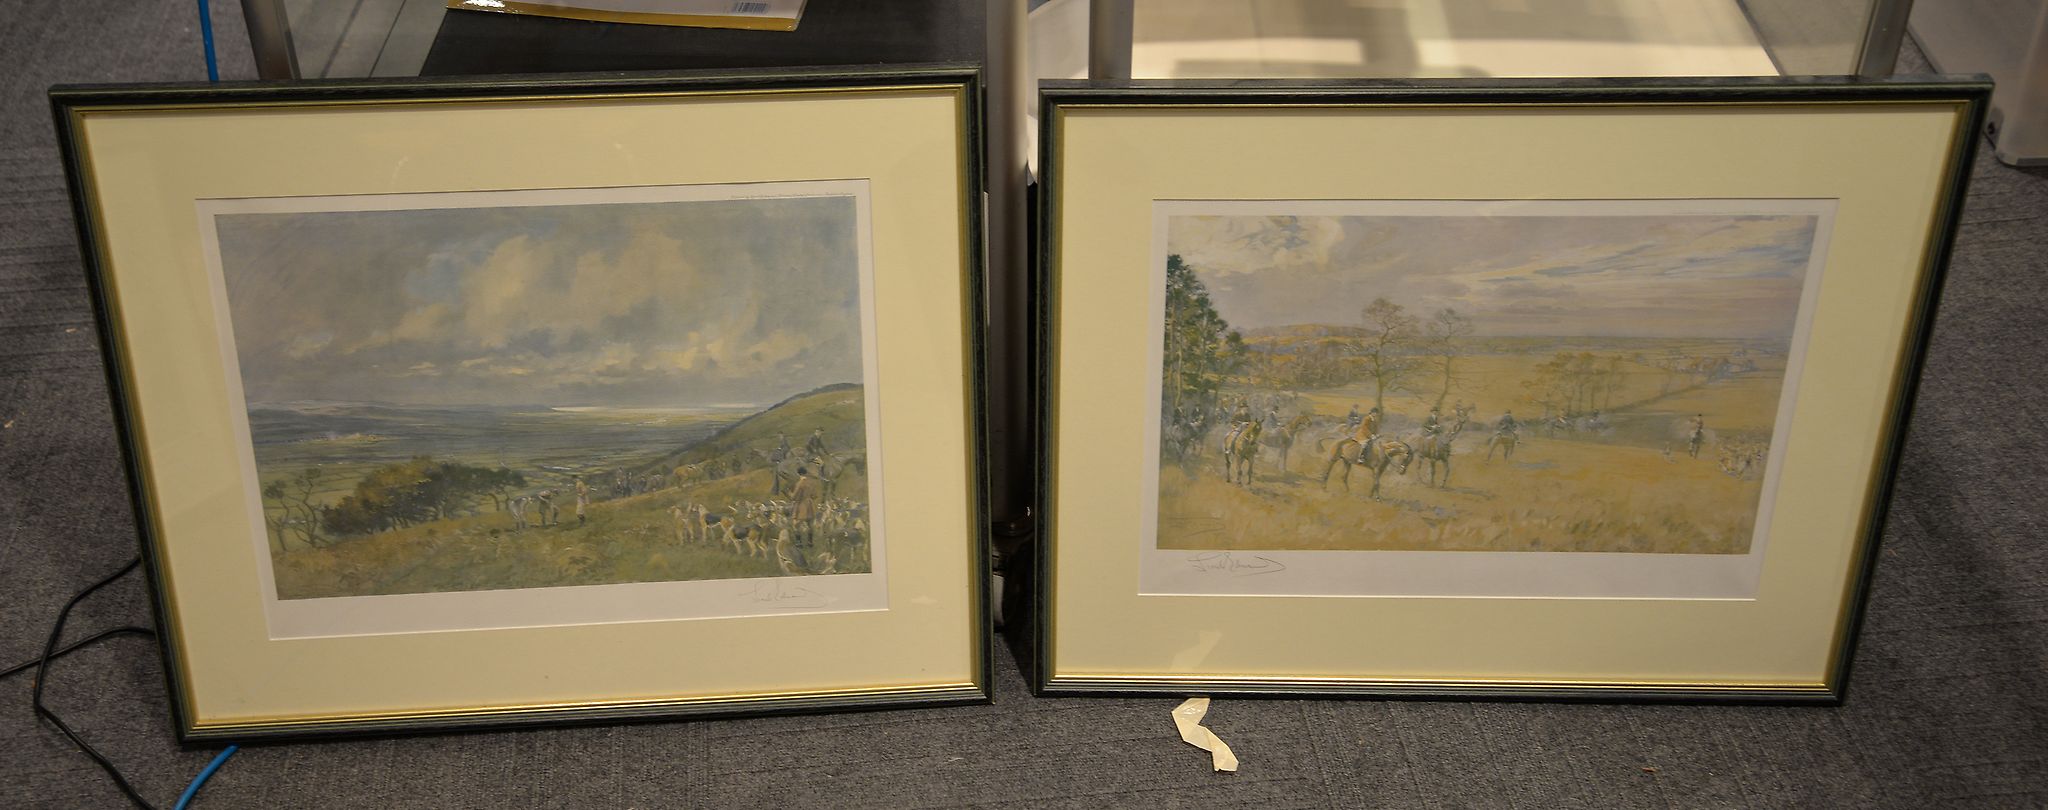 Lionel Edwards Hunting Scenes Offset lithographs, a pair Both signed in pencil Each image 31 x 48cm.